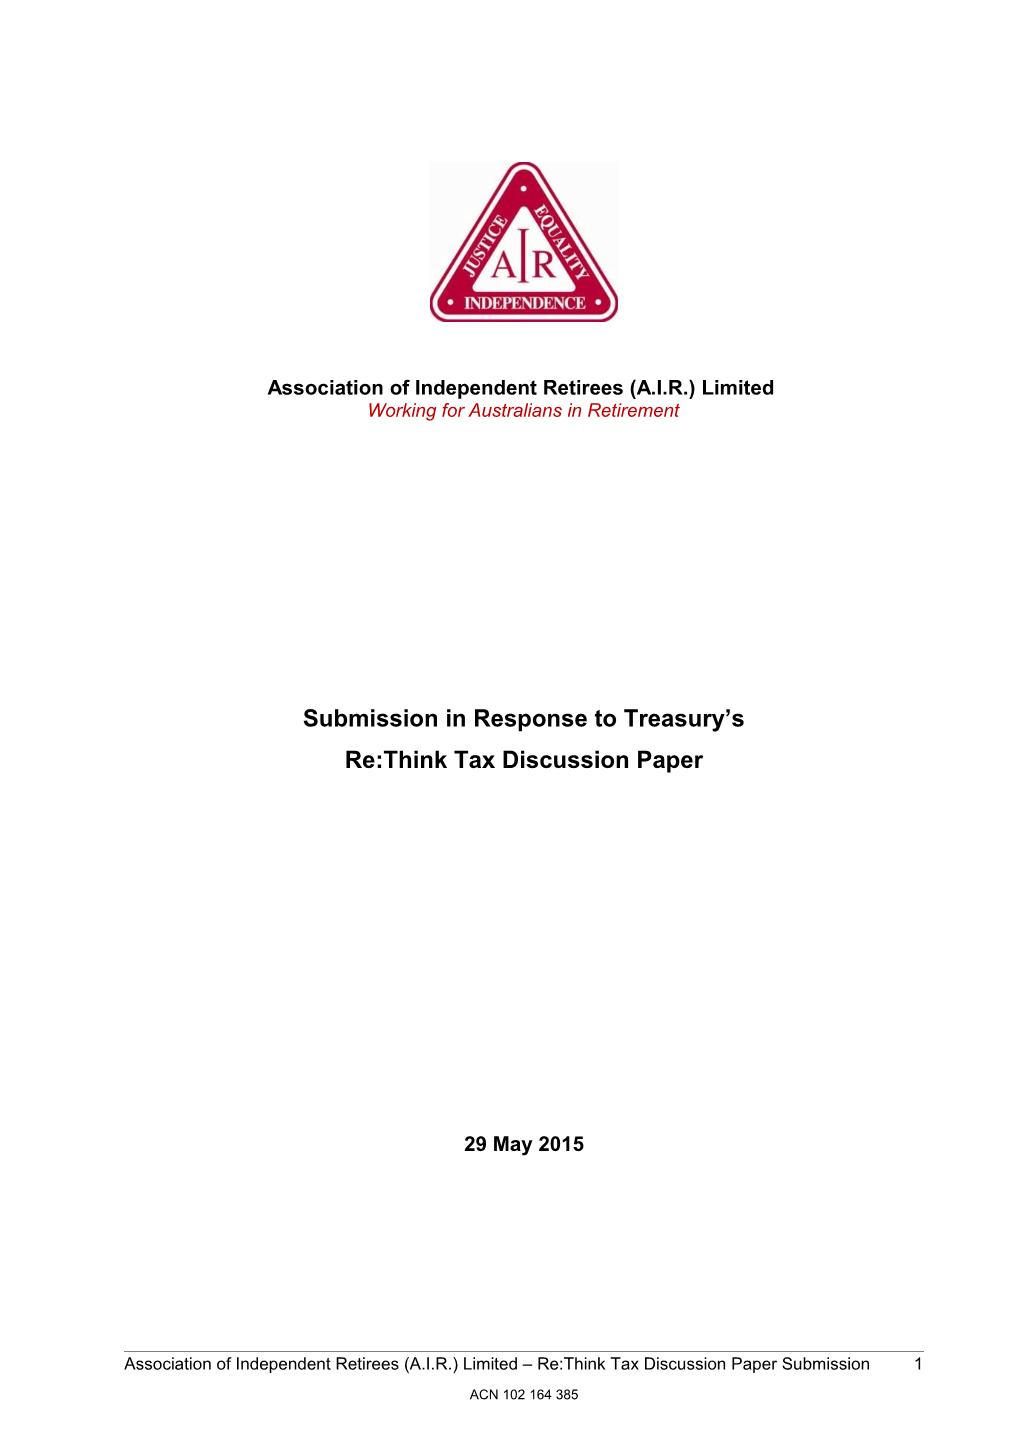 Association of Independent Retirees - Submission to the Tax Discussion Paper